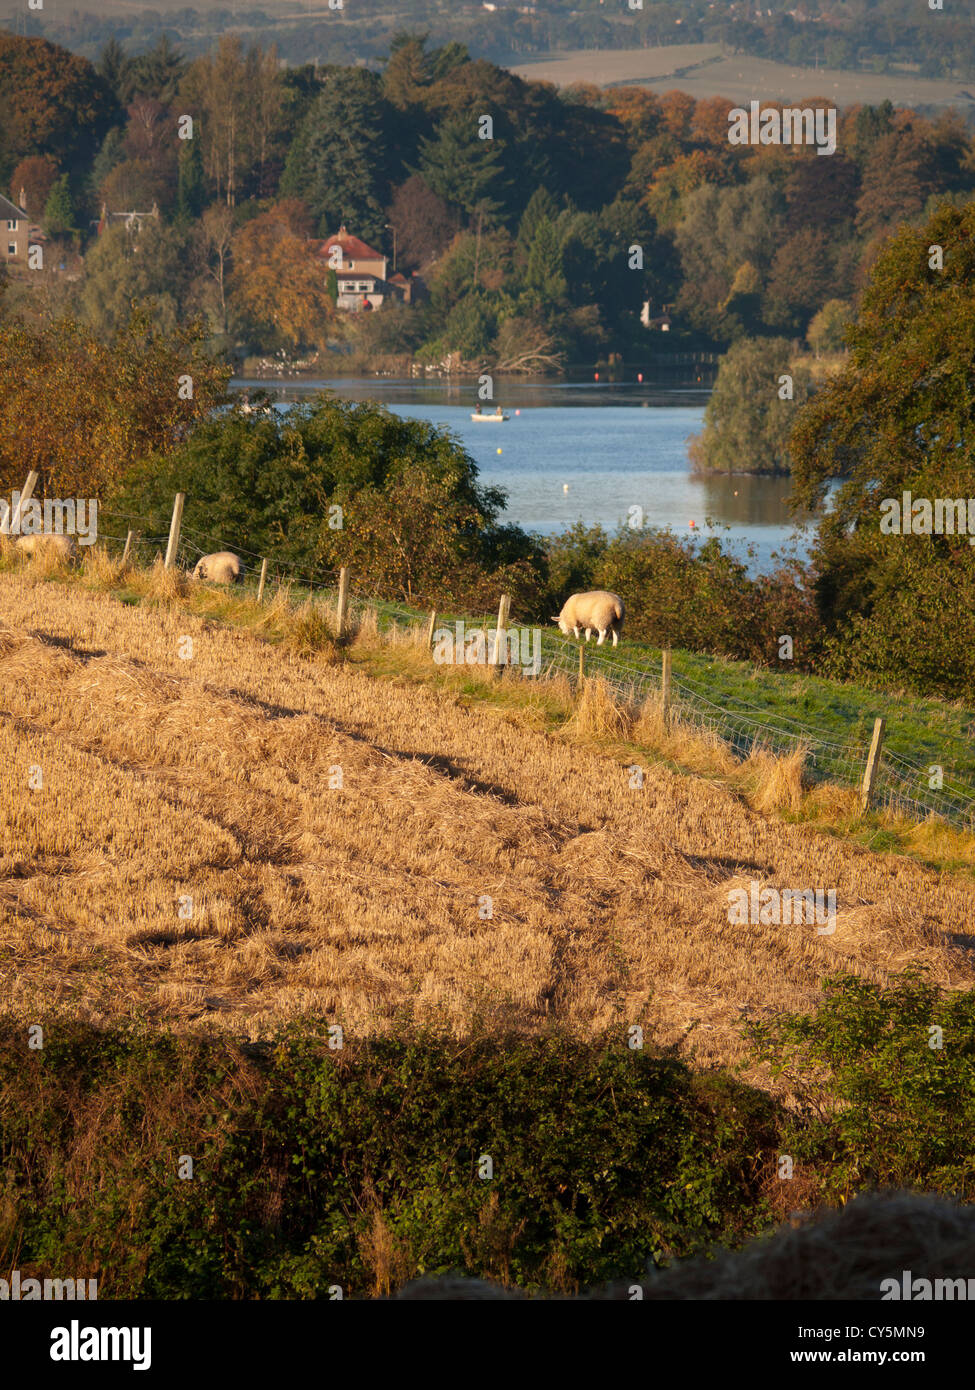 Sheep overlooking a loch in Scotland. Stock Photo